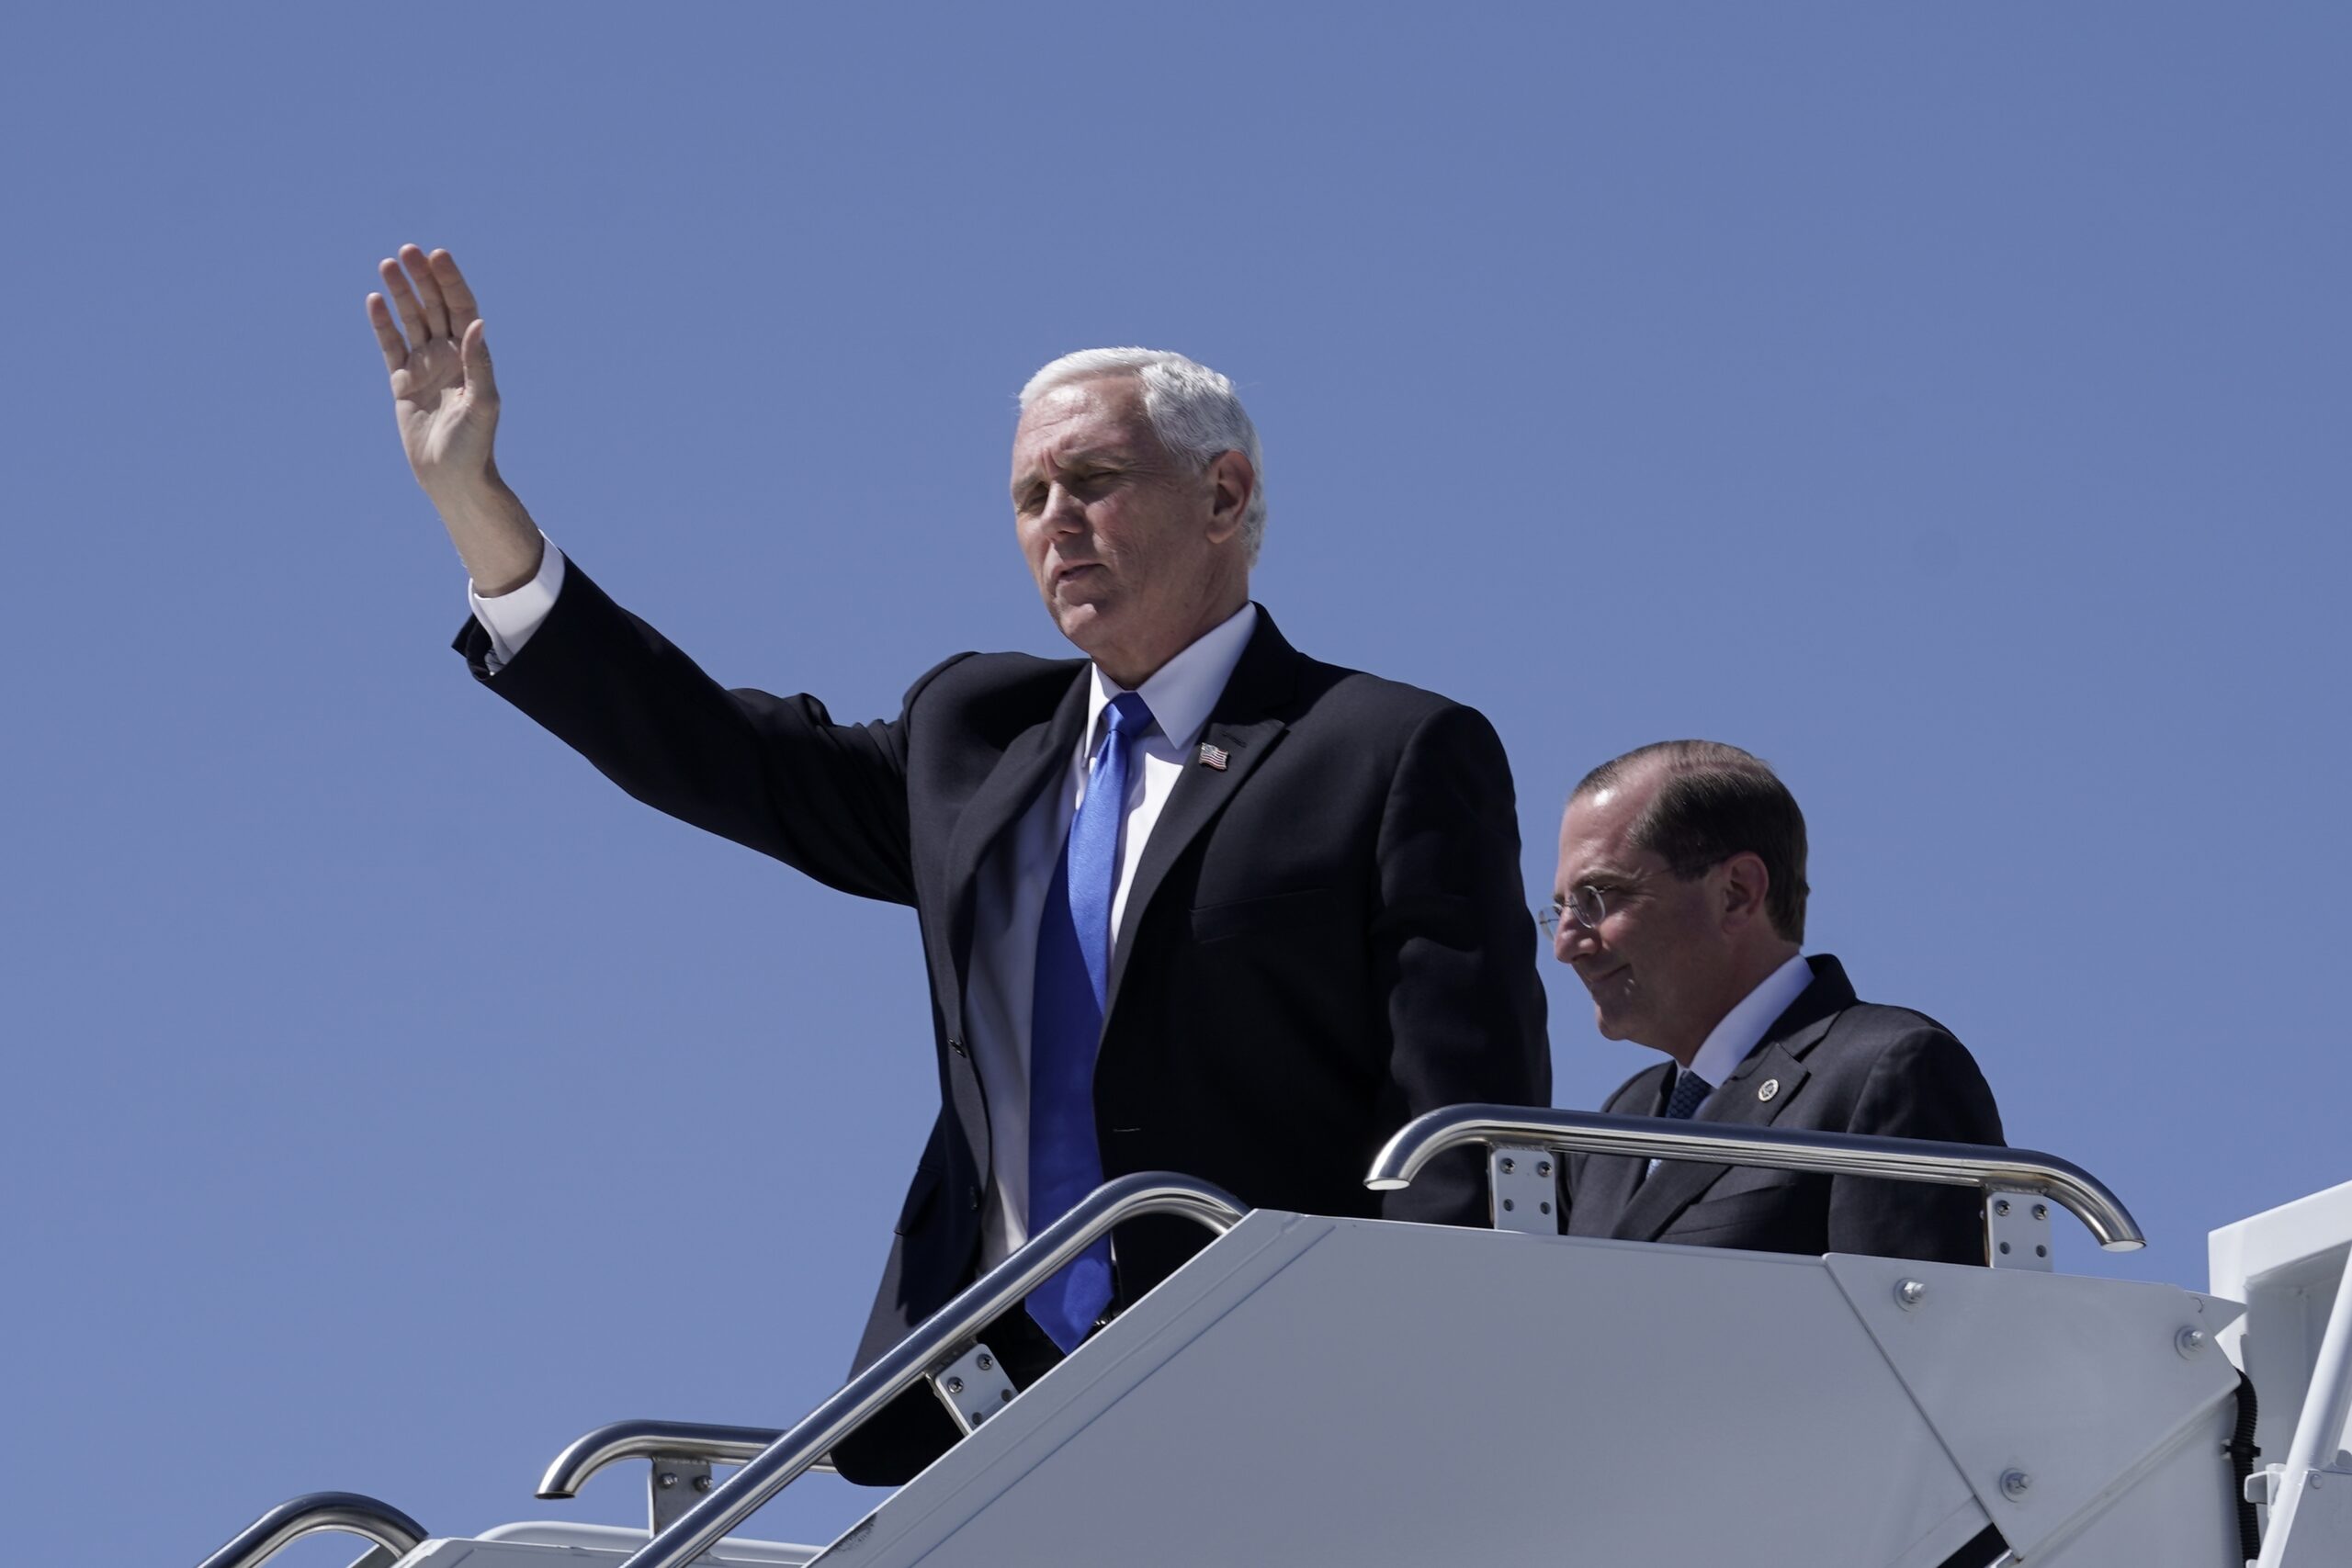 Mike Pence exits airplane